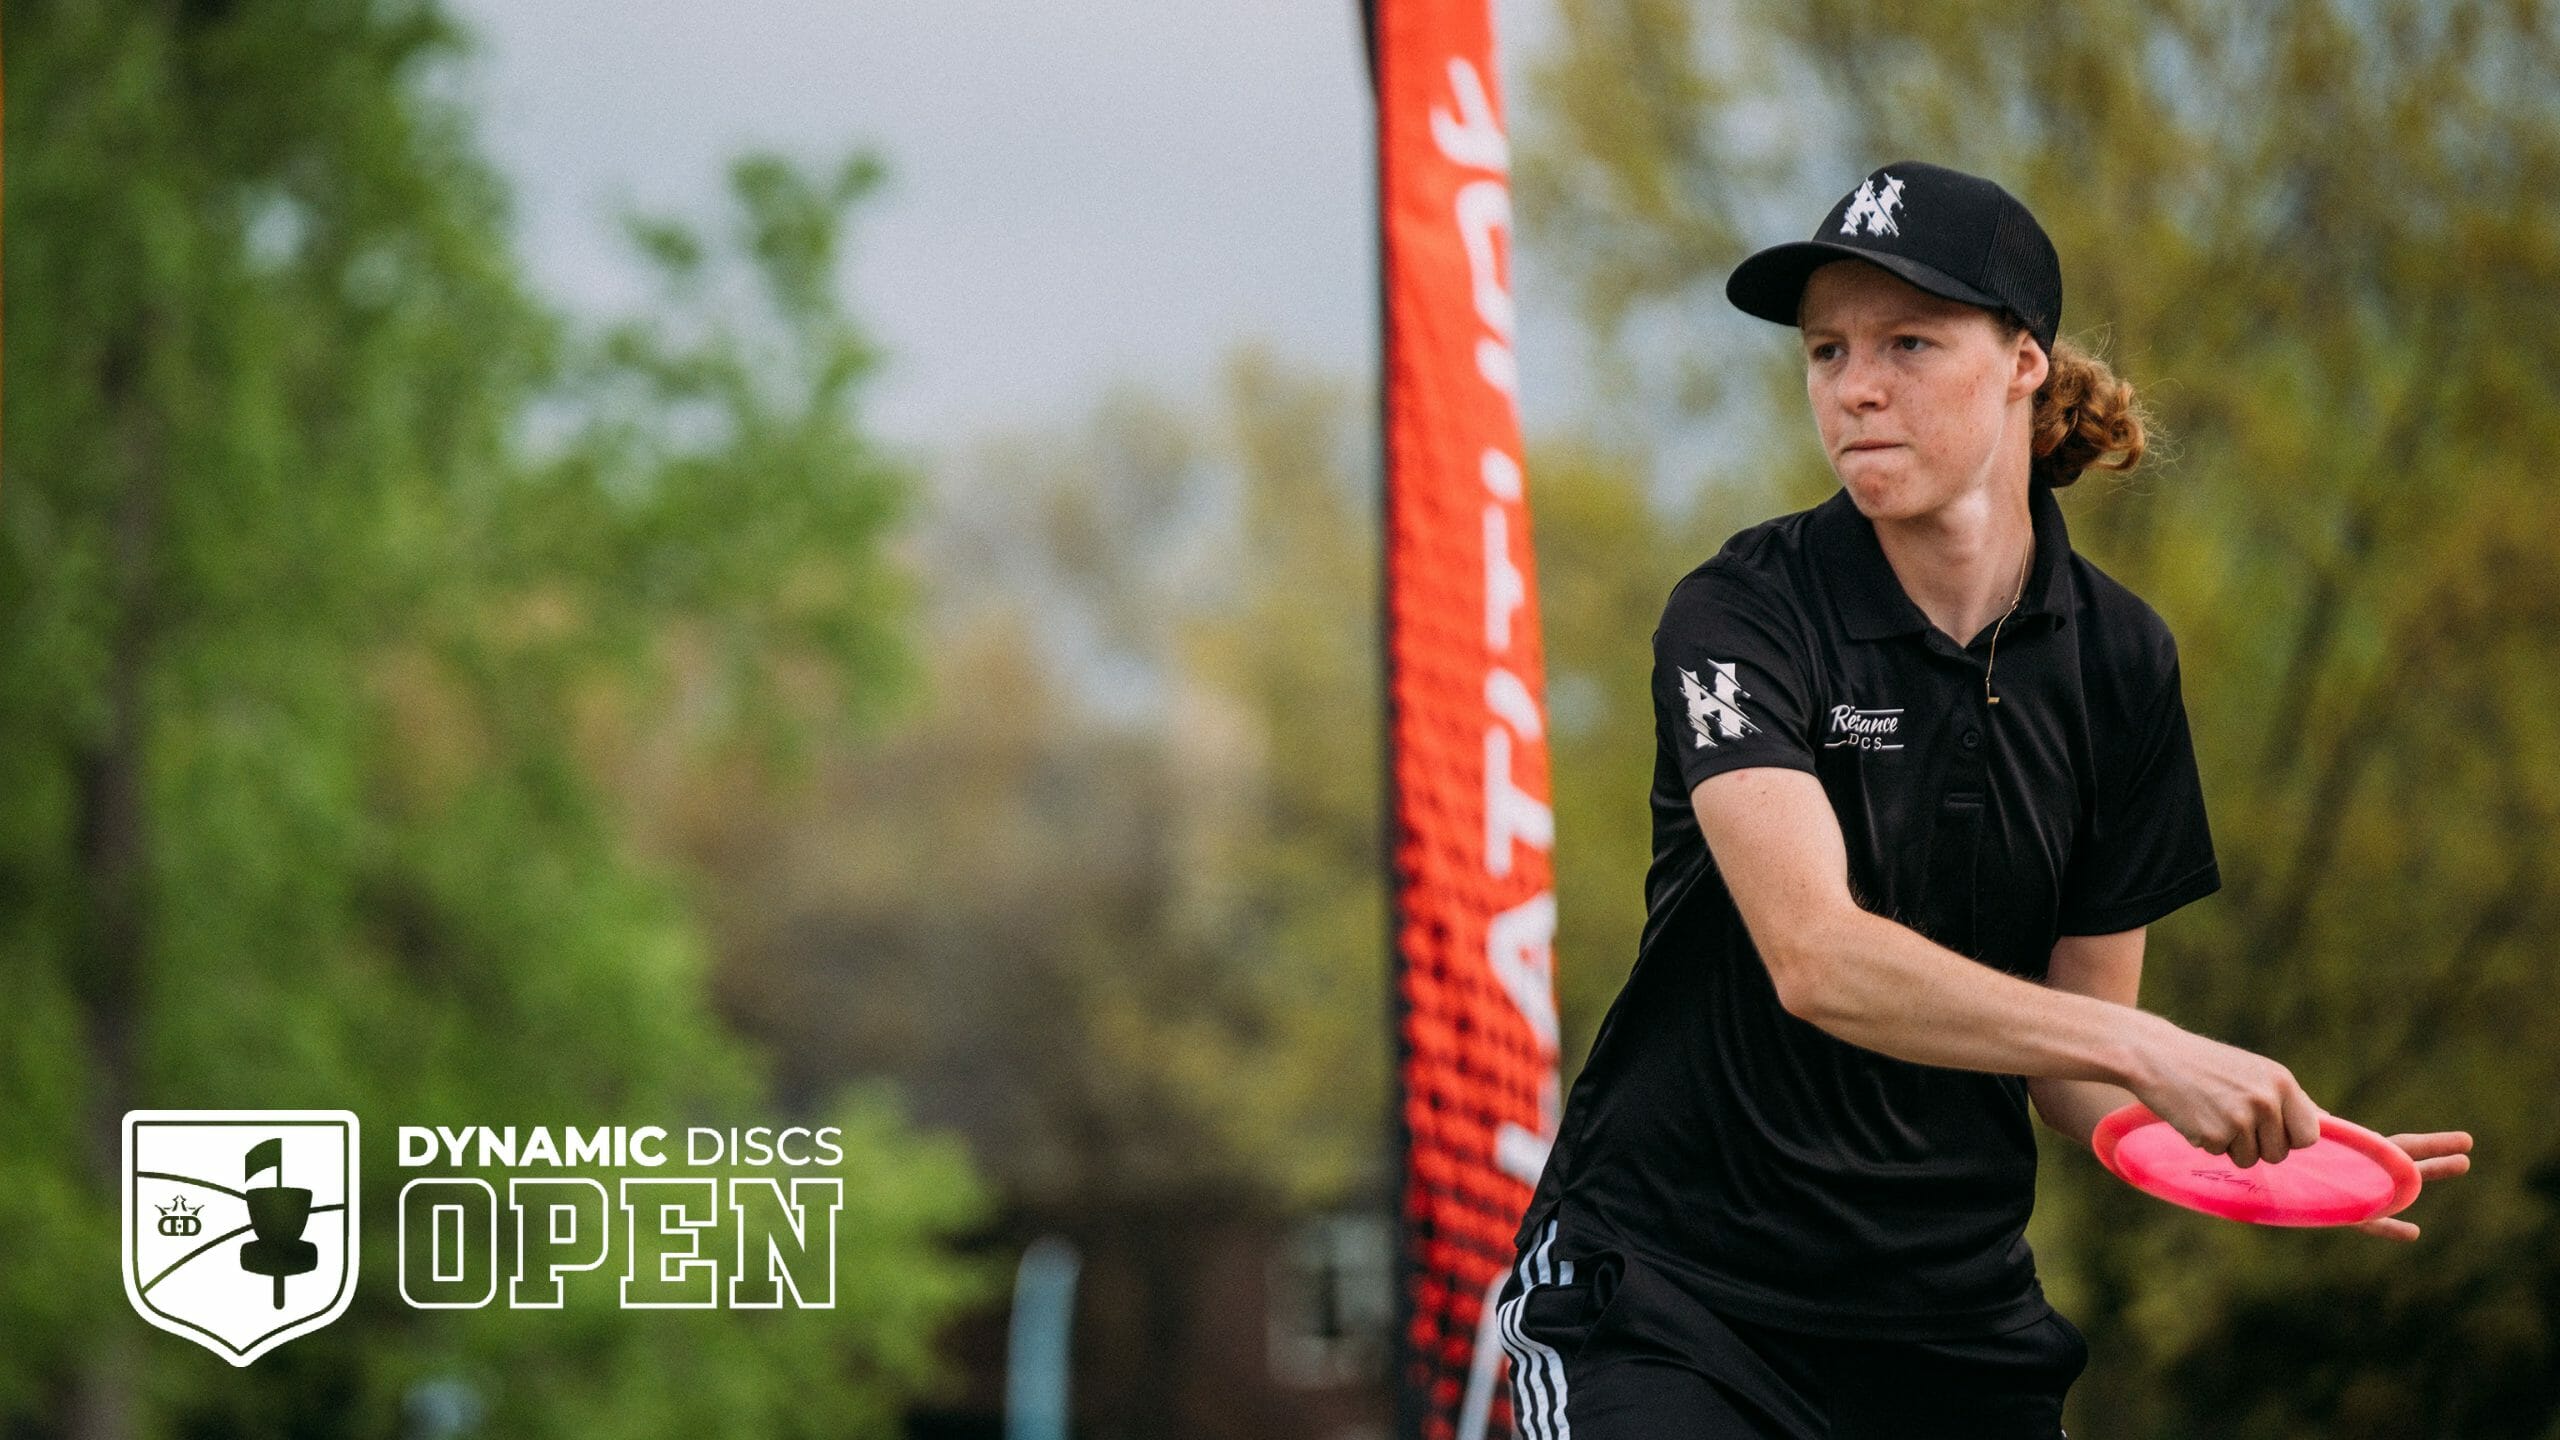 DDO Allen, King Stay 1, 2 With Hot Rounds Ultiworld Disc Golf